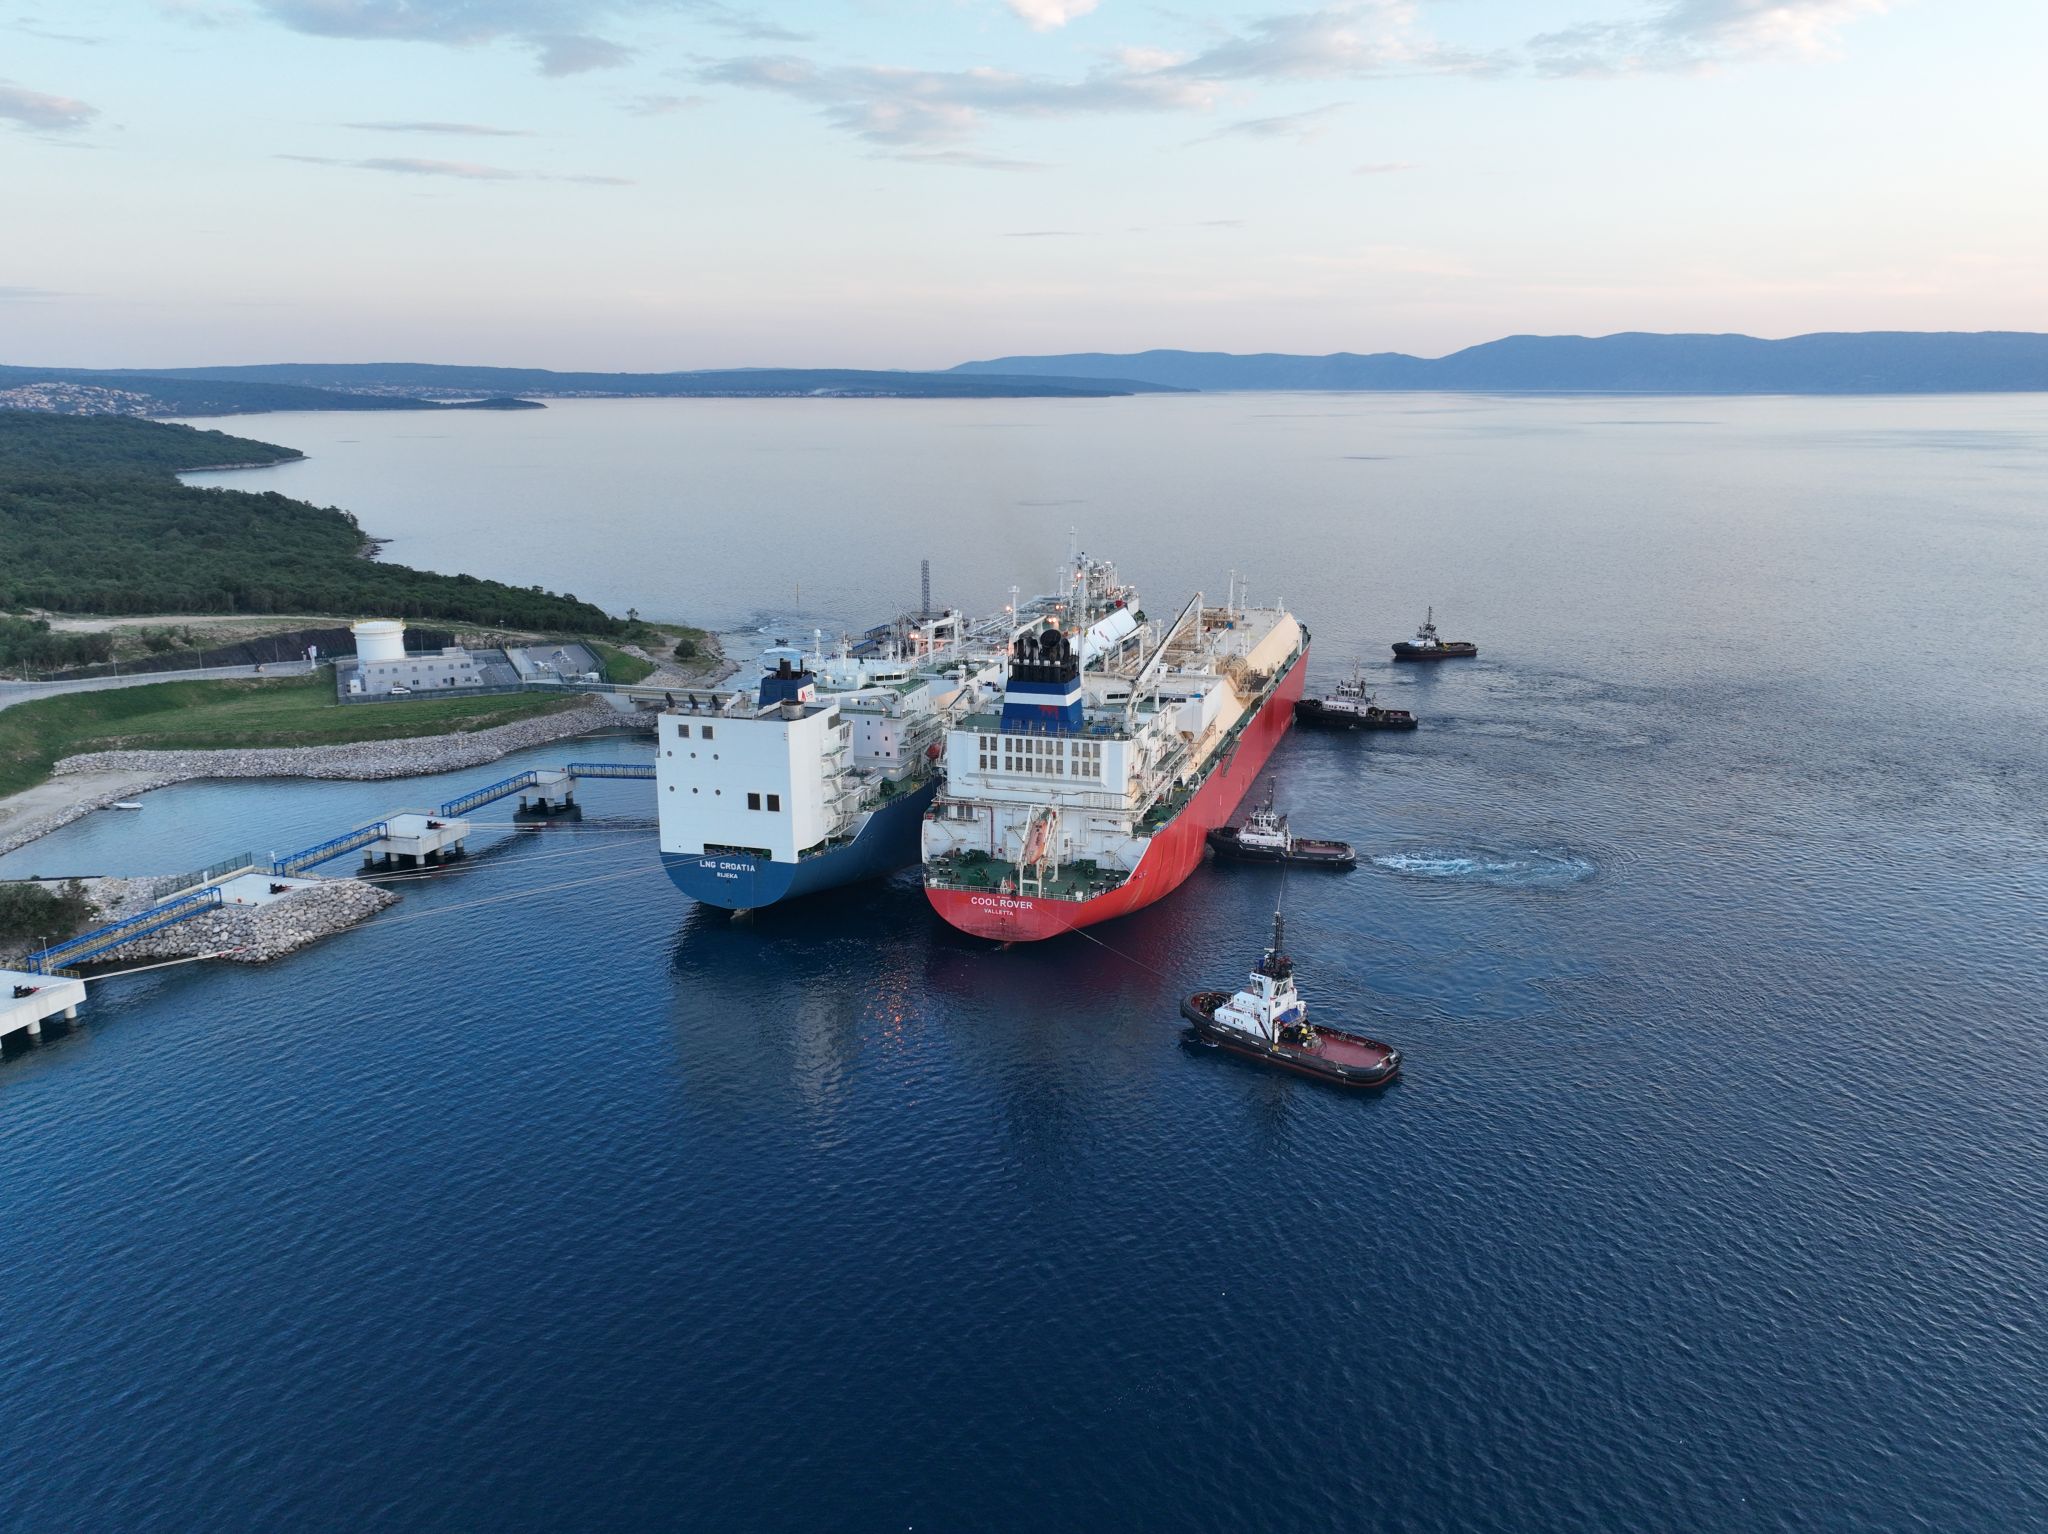 State-owned terminal operator LNG Croatia said it had received the first cargo of liquefied natural gas from Indonesia at its FSRU-based facility on the northern Adriatic island of Krk.